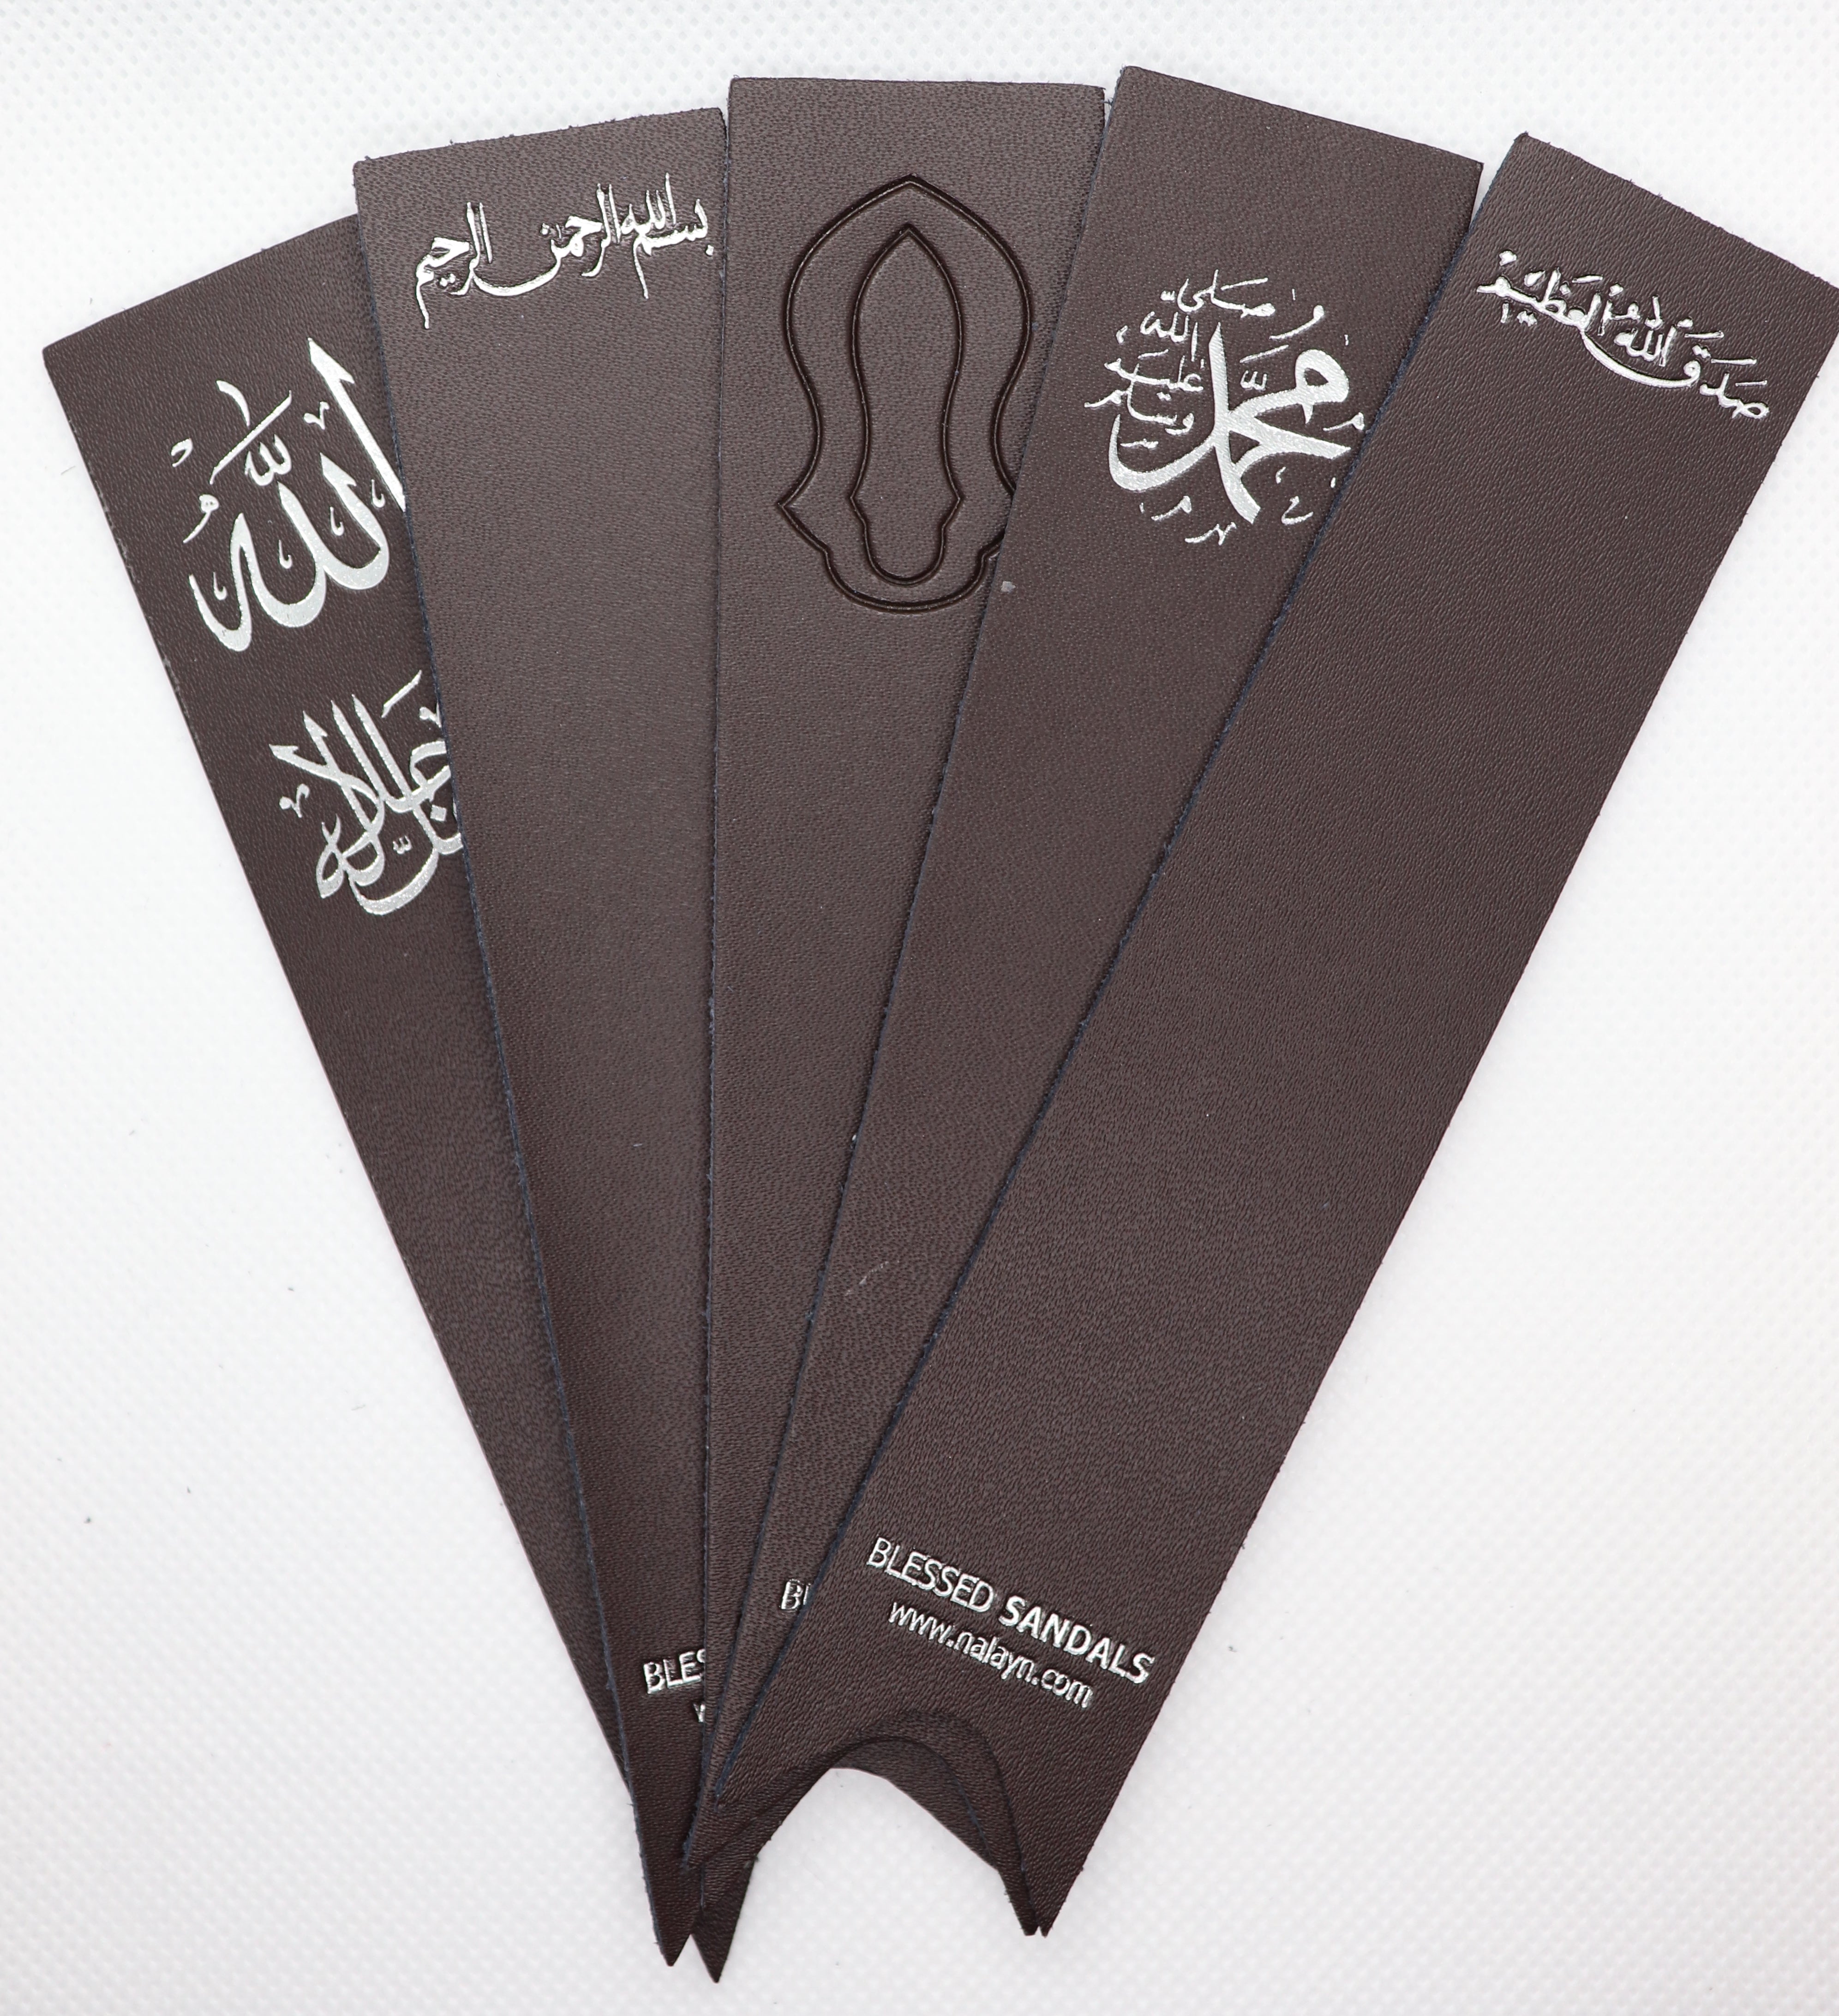 Exlusive real leather bookmarks